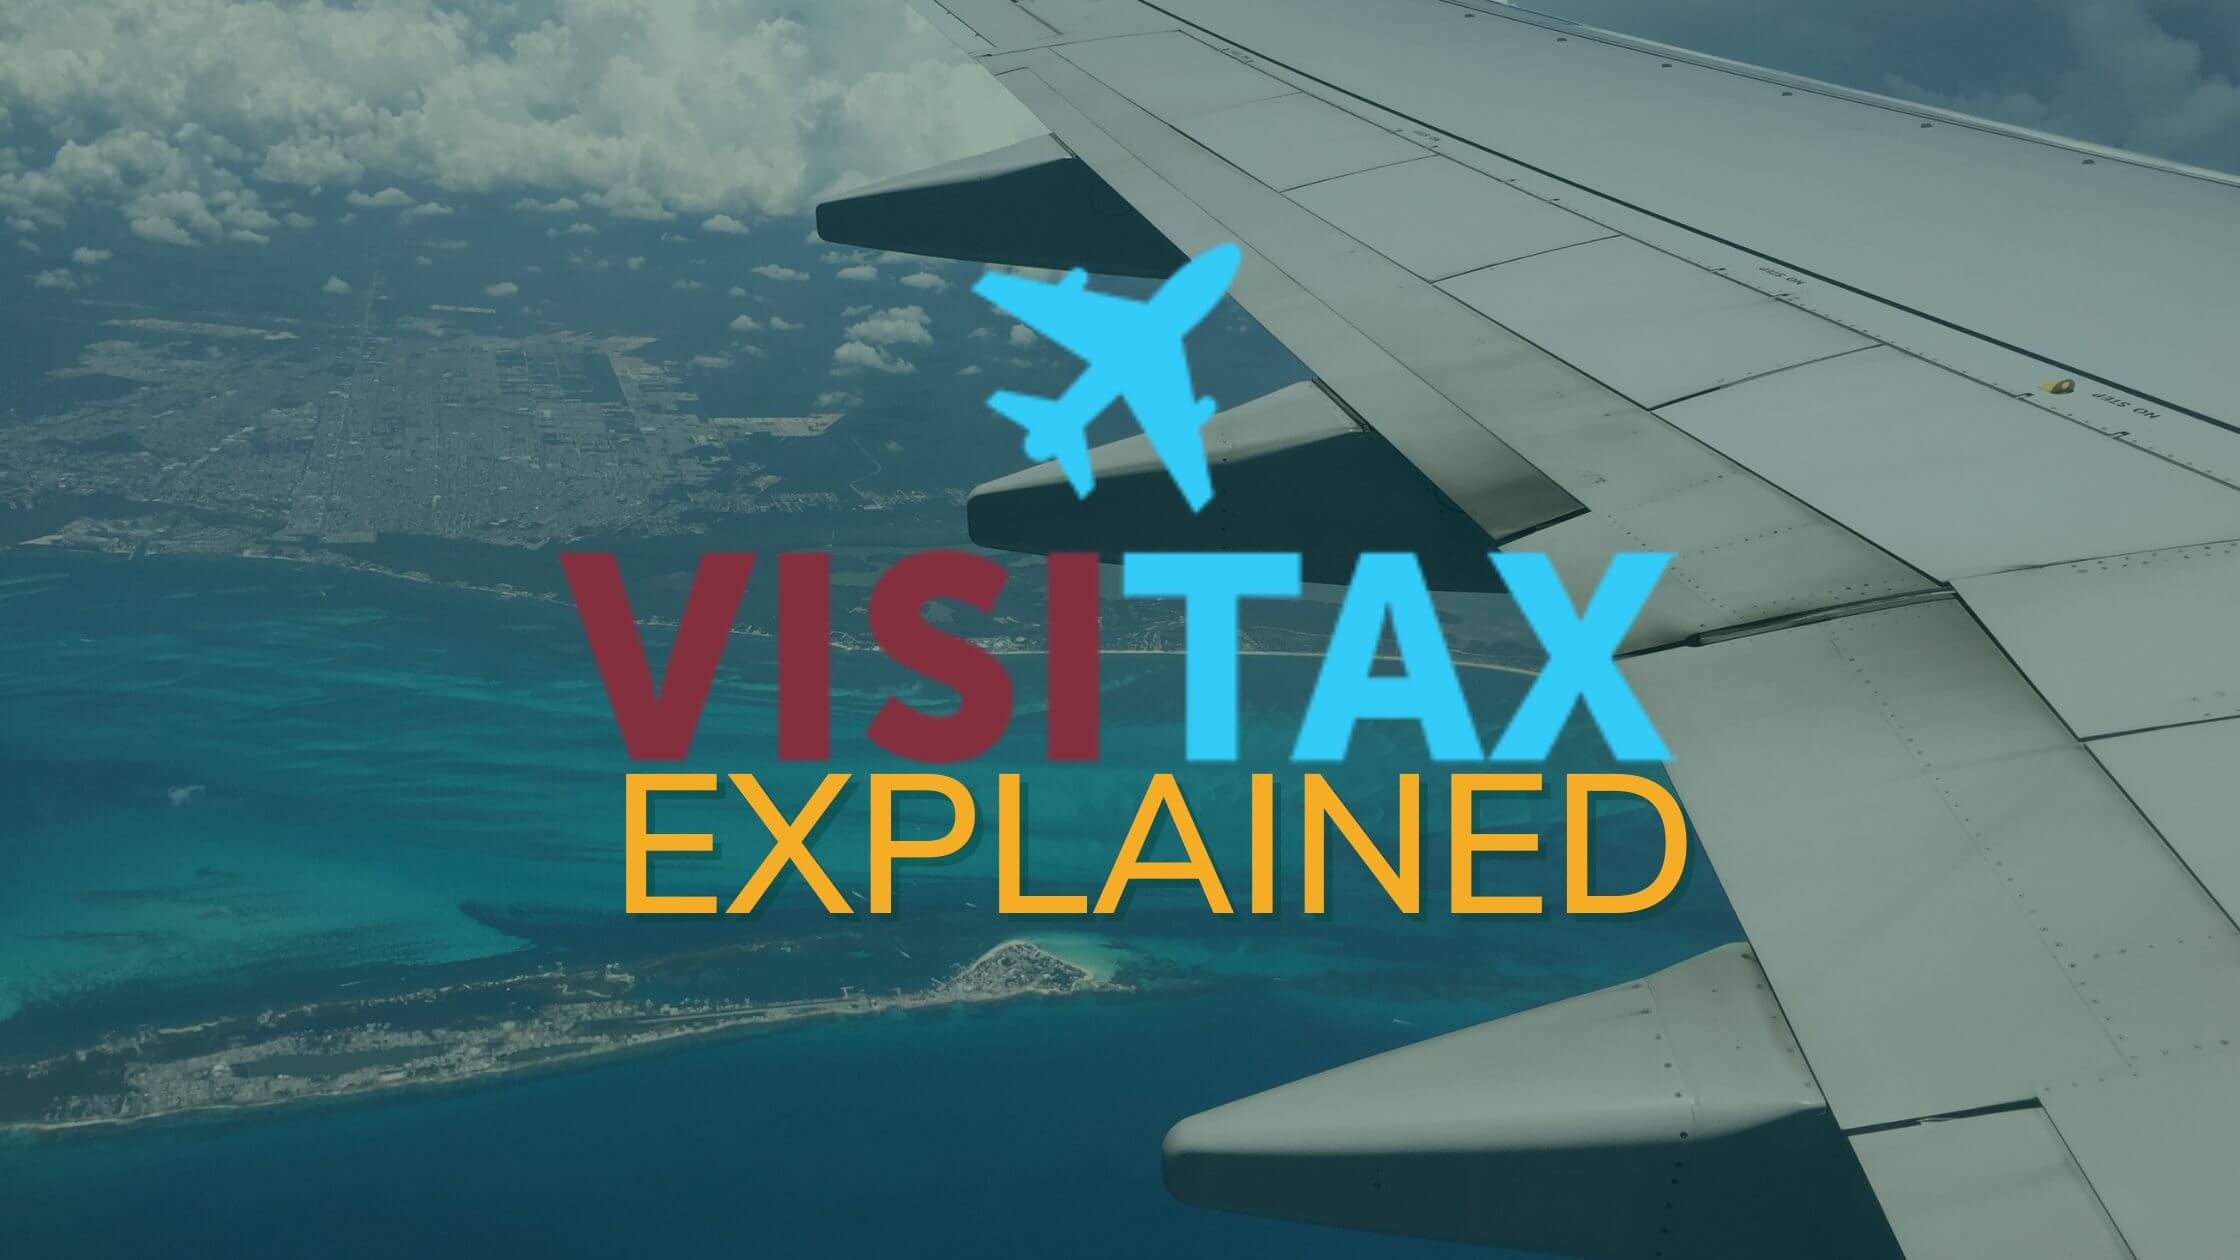 VISITAX Explained: What Is VISITAX & Do I Need To Pay It When Visiting Mexico?